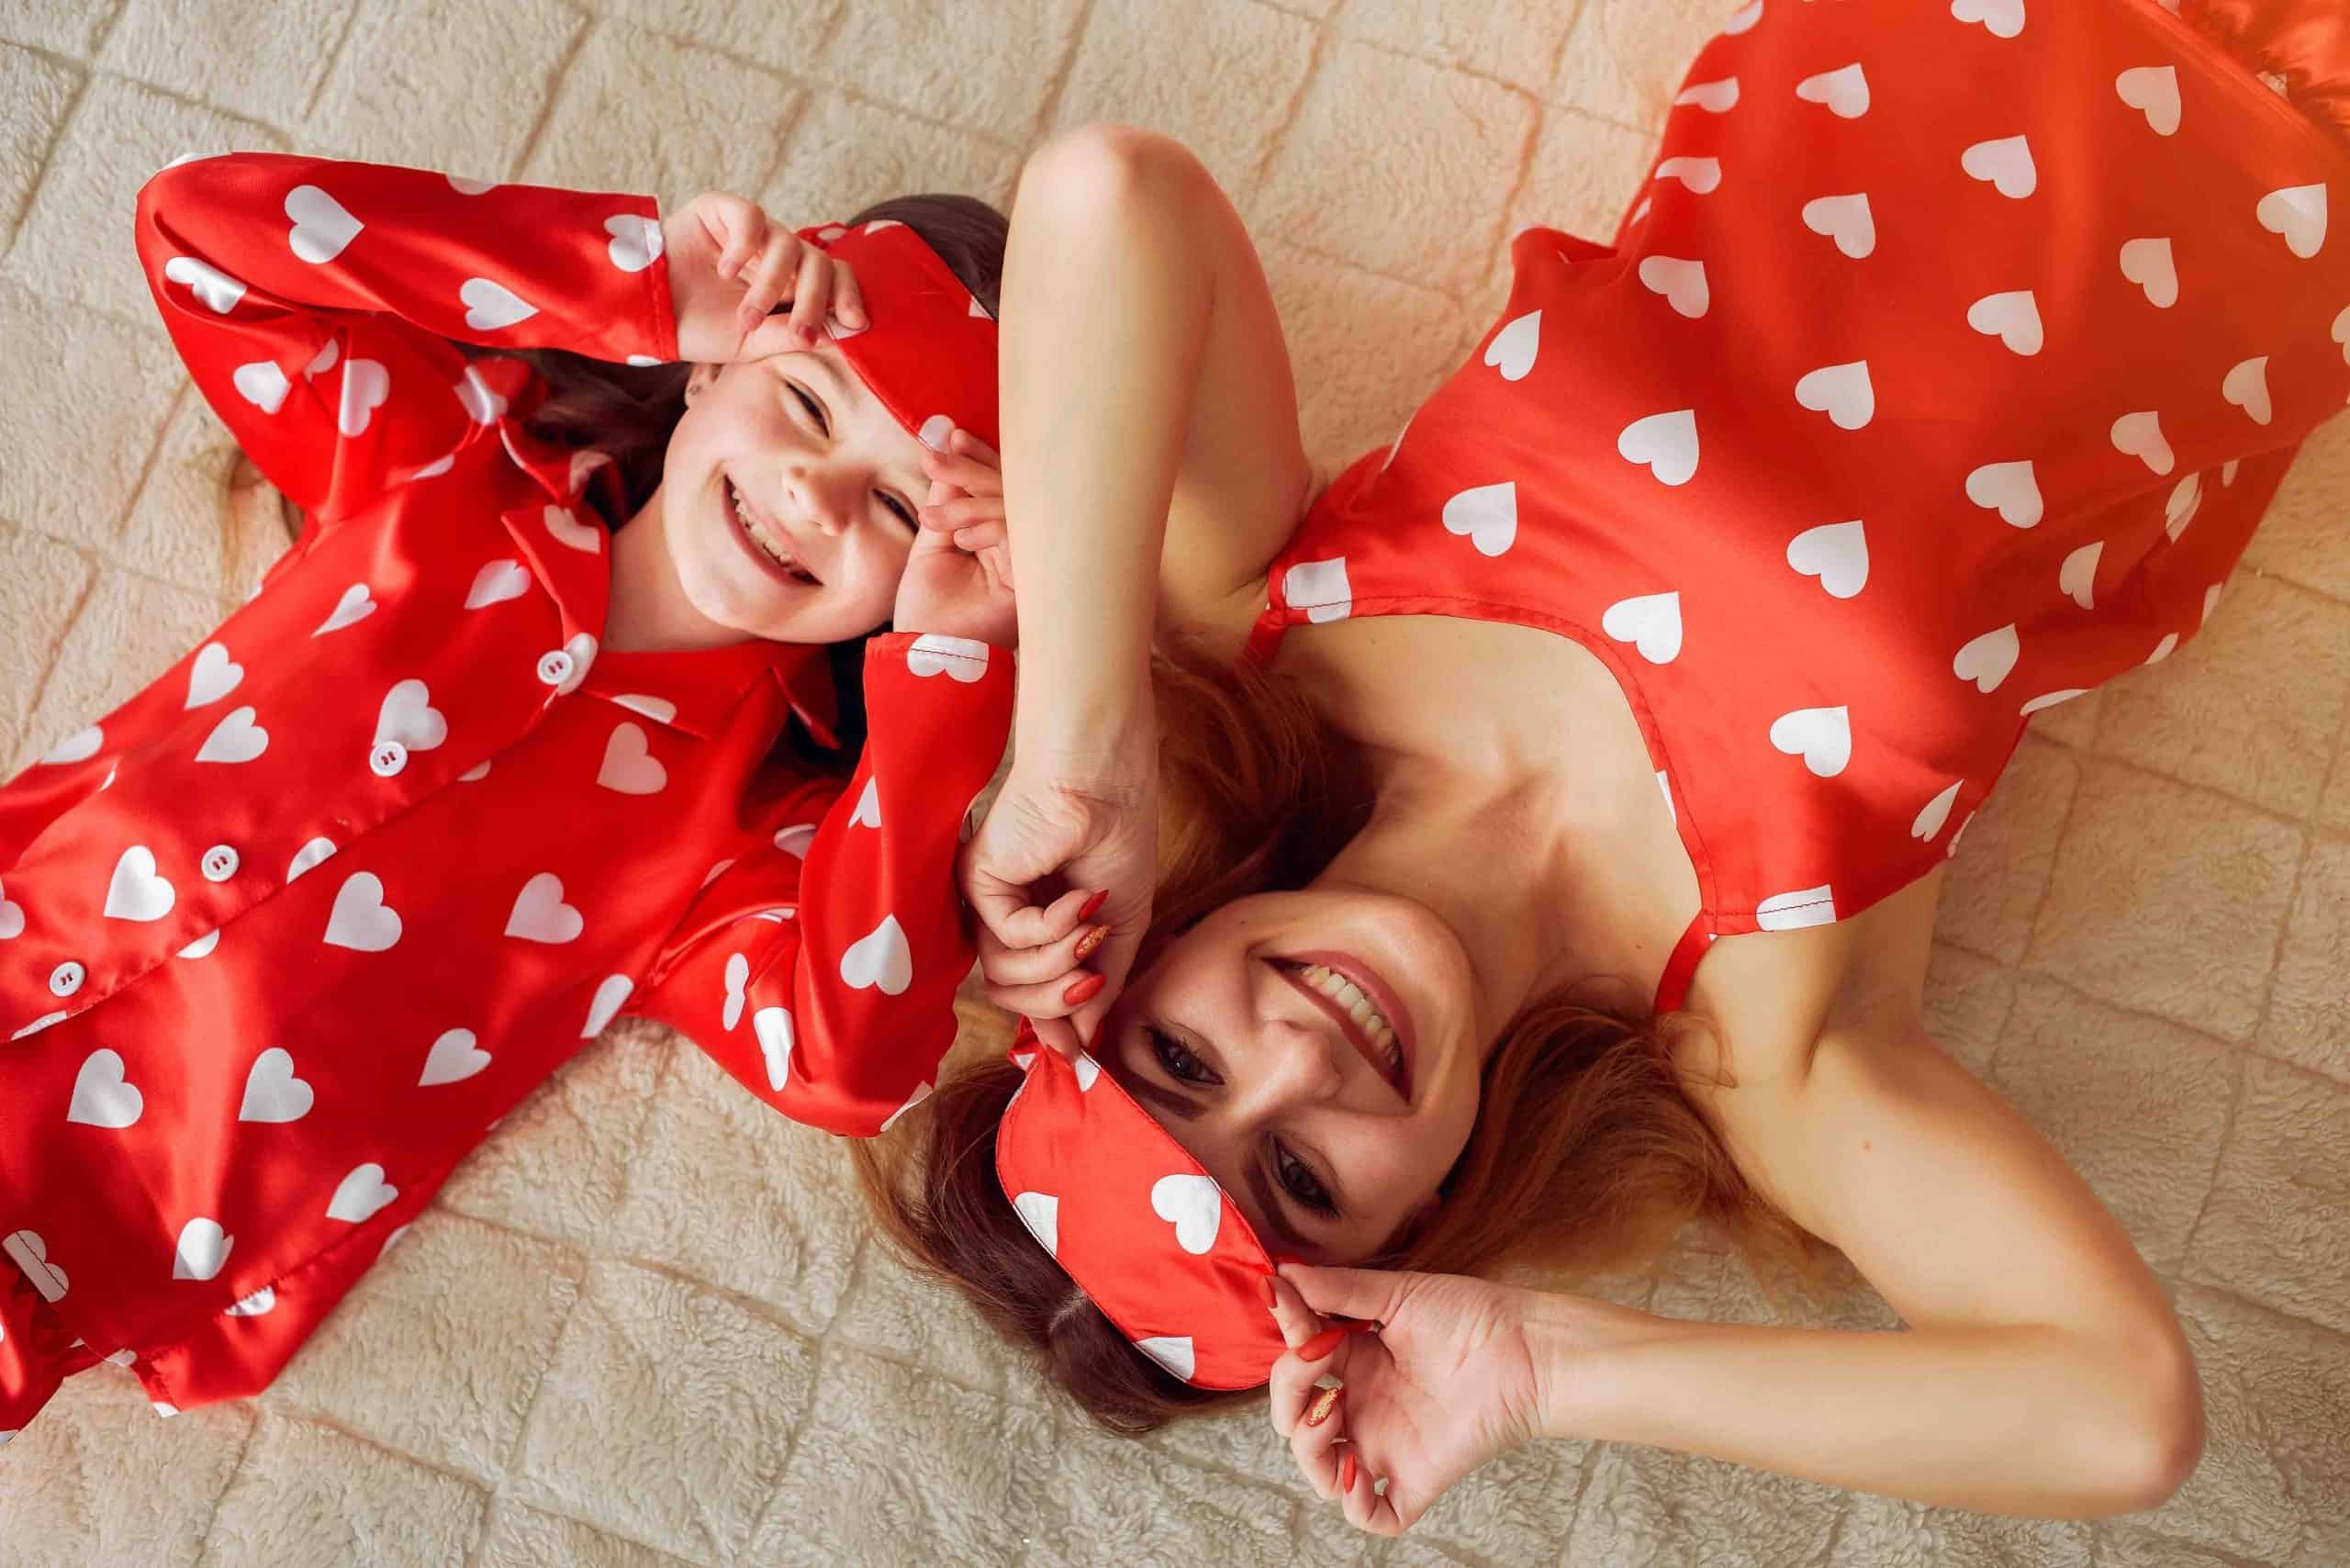 15-facts-about-national-pajama-day-april-6th